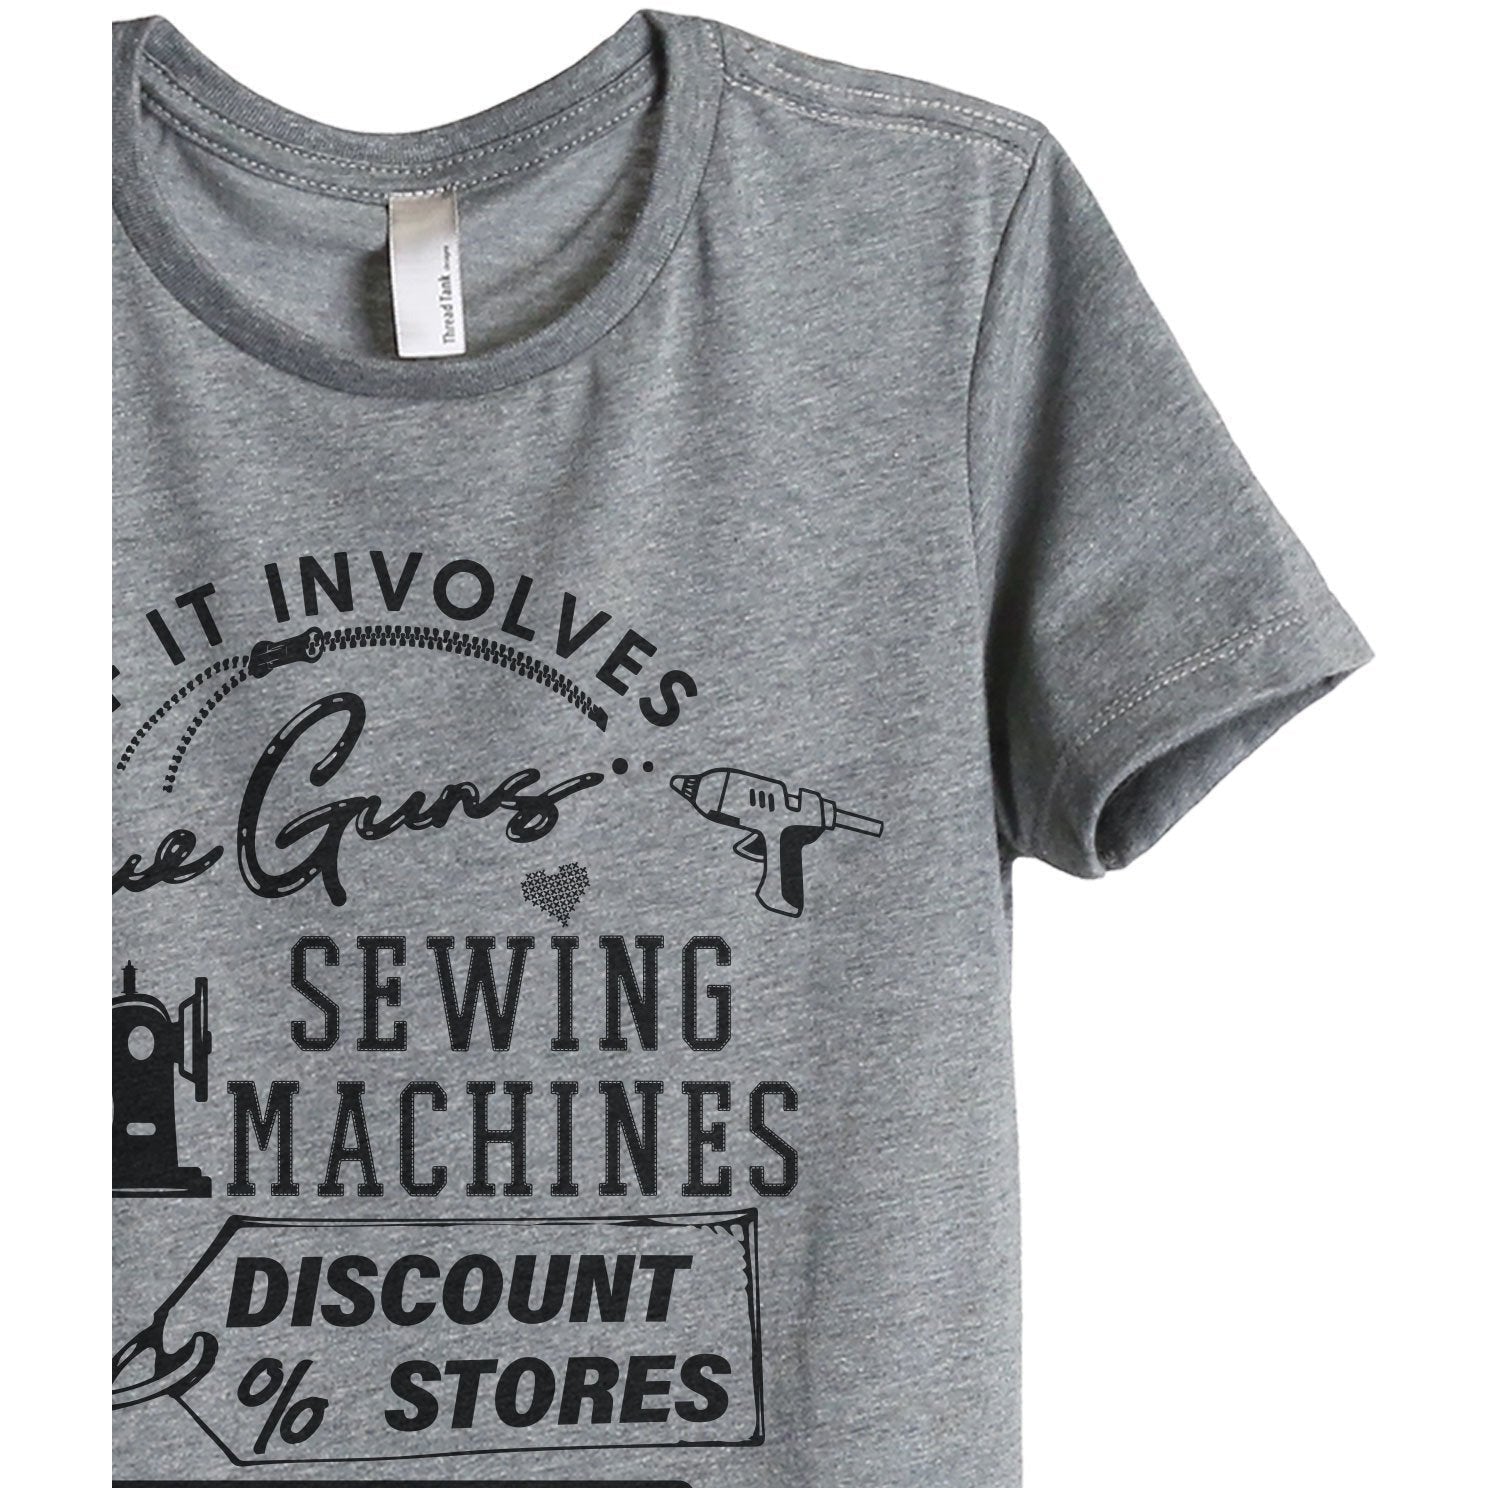 Glue Guns Sewing Machines And Discount Stores Women's Relaxed Crewneck T-Shirt Top Tee Heather Grey Zoom Details
